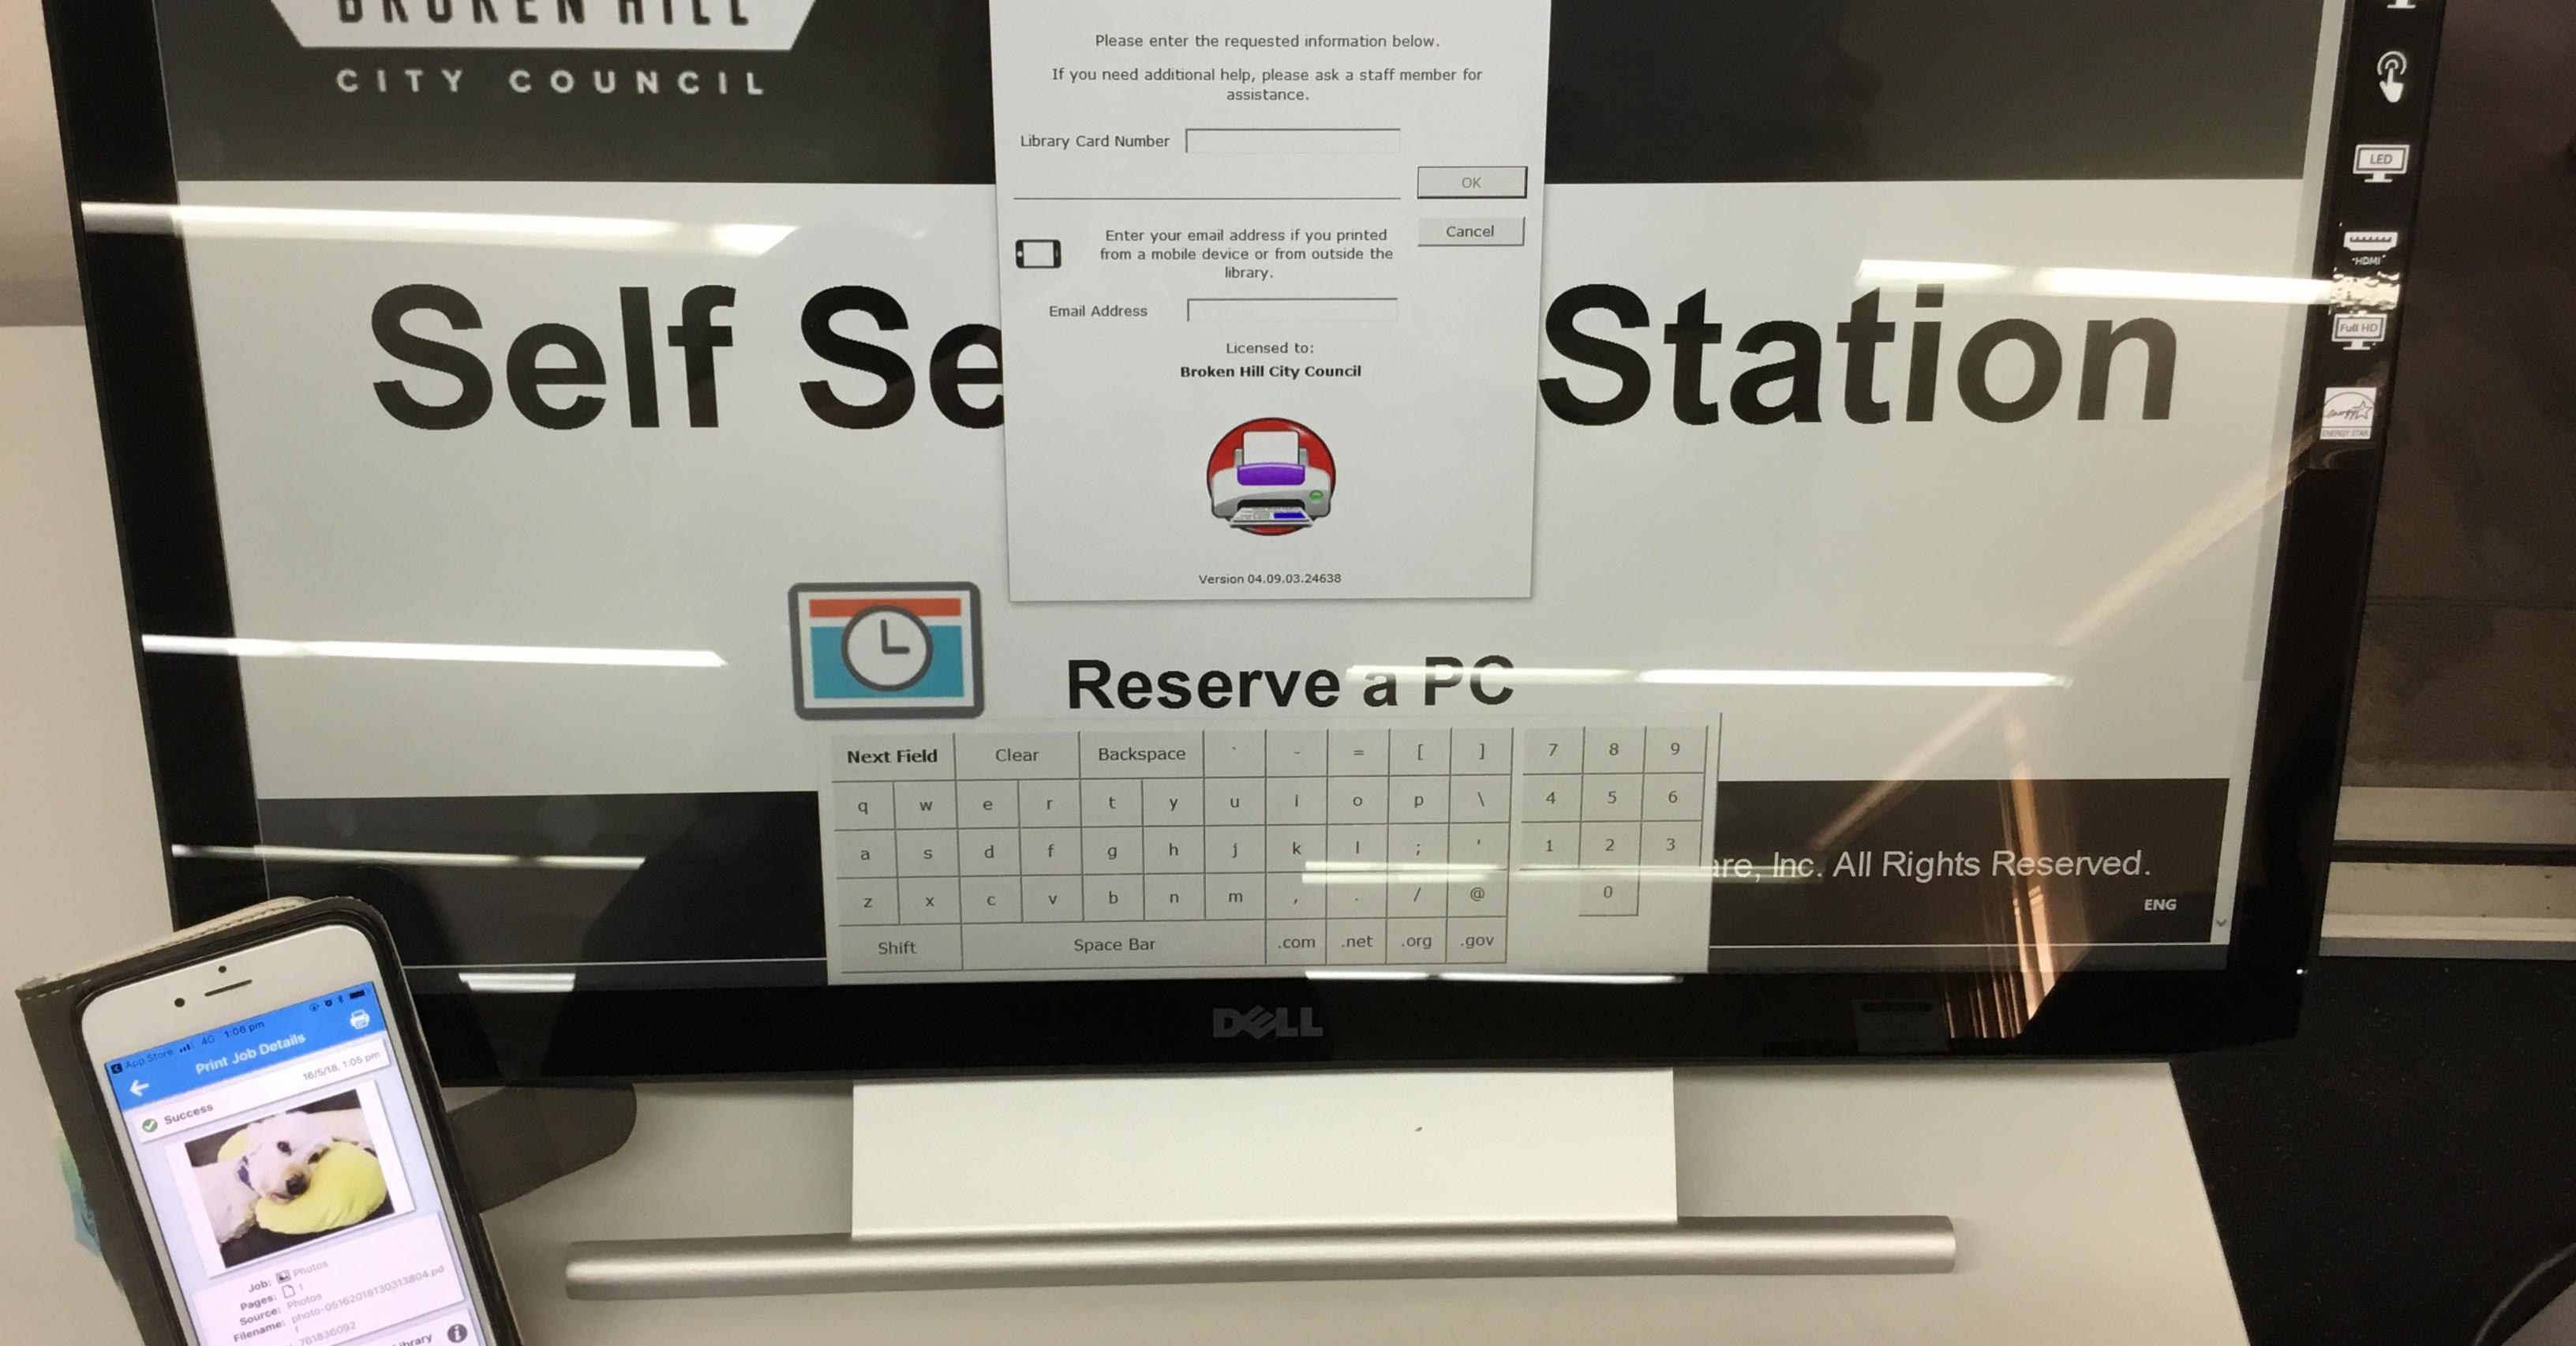 Image of self serve print station and mobile device